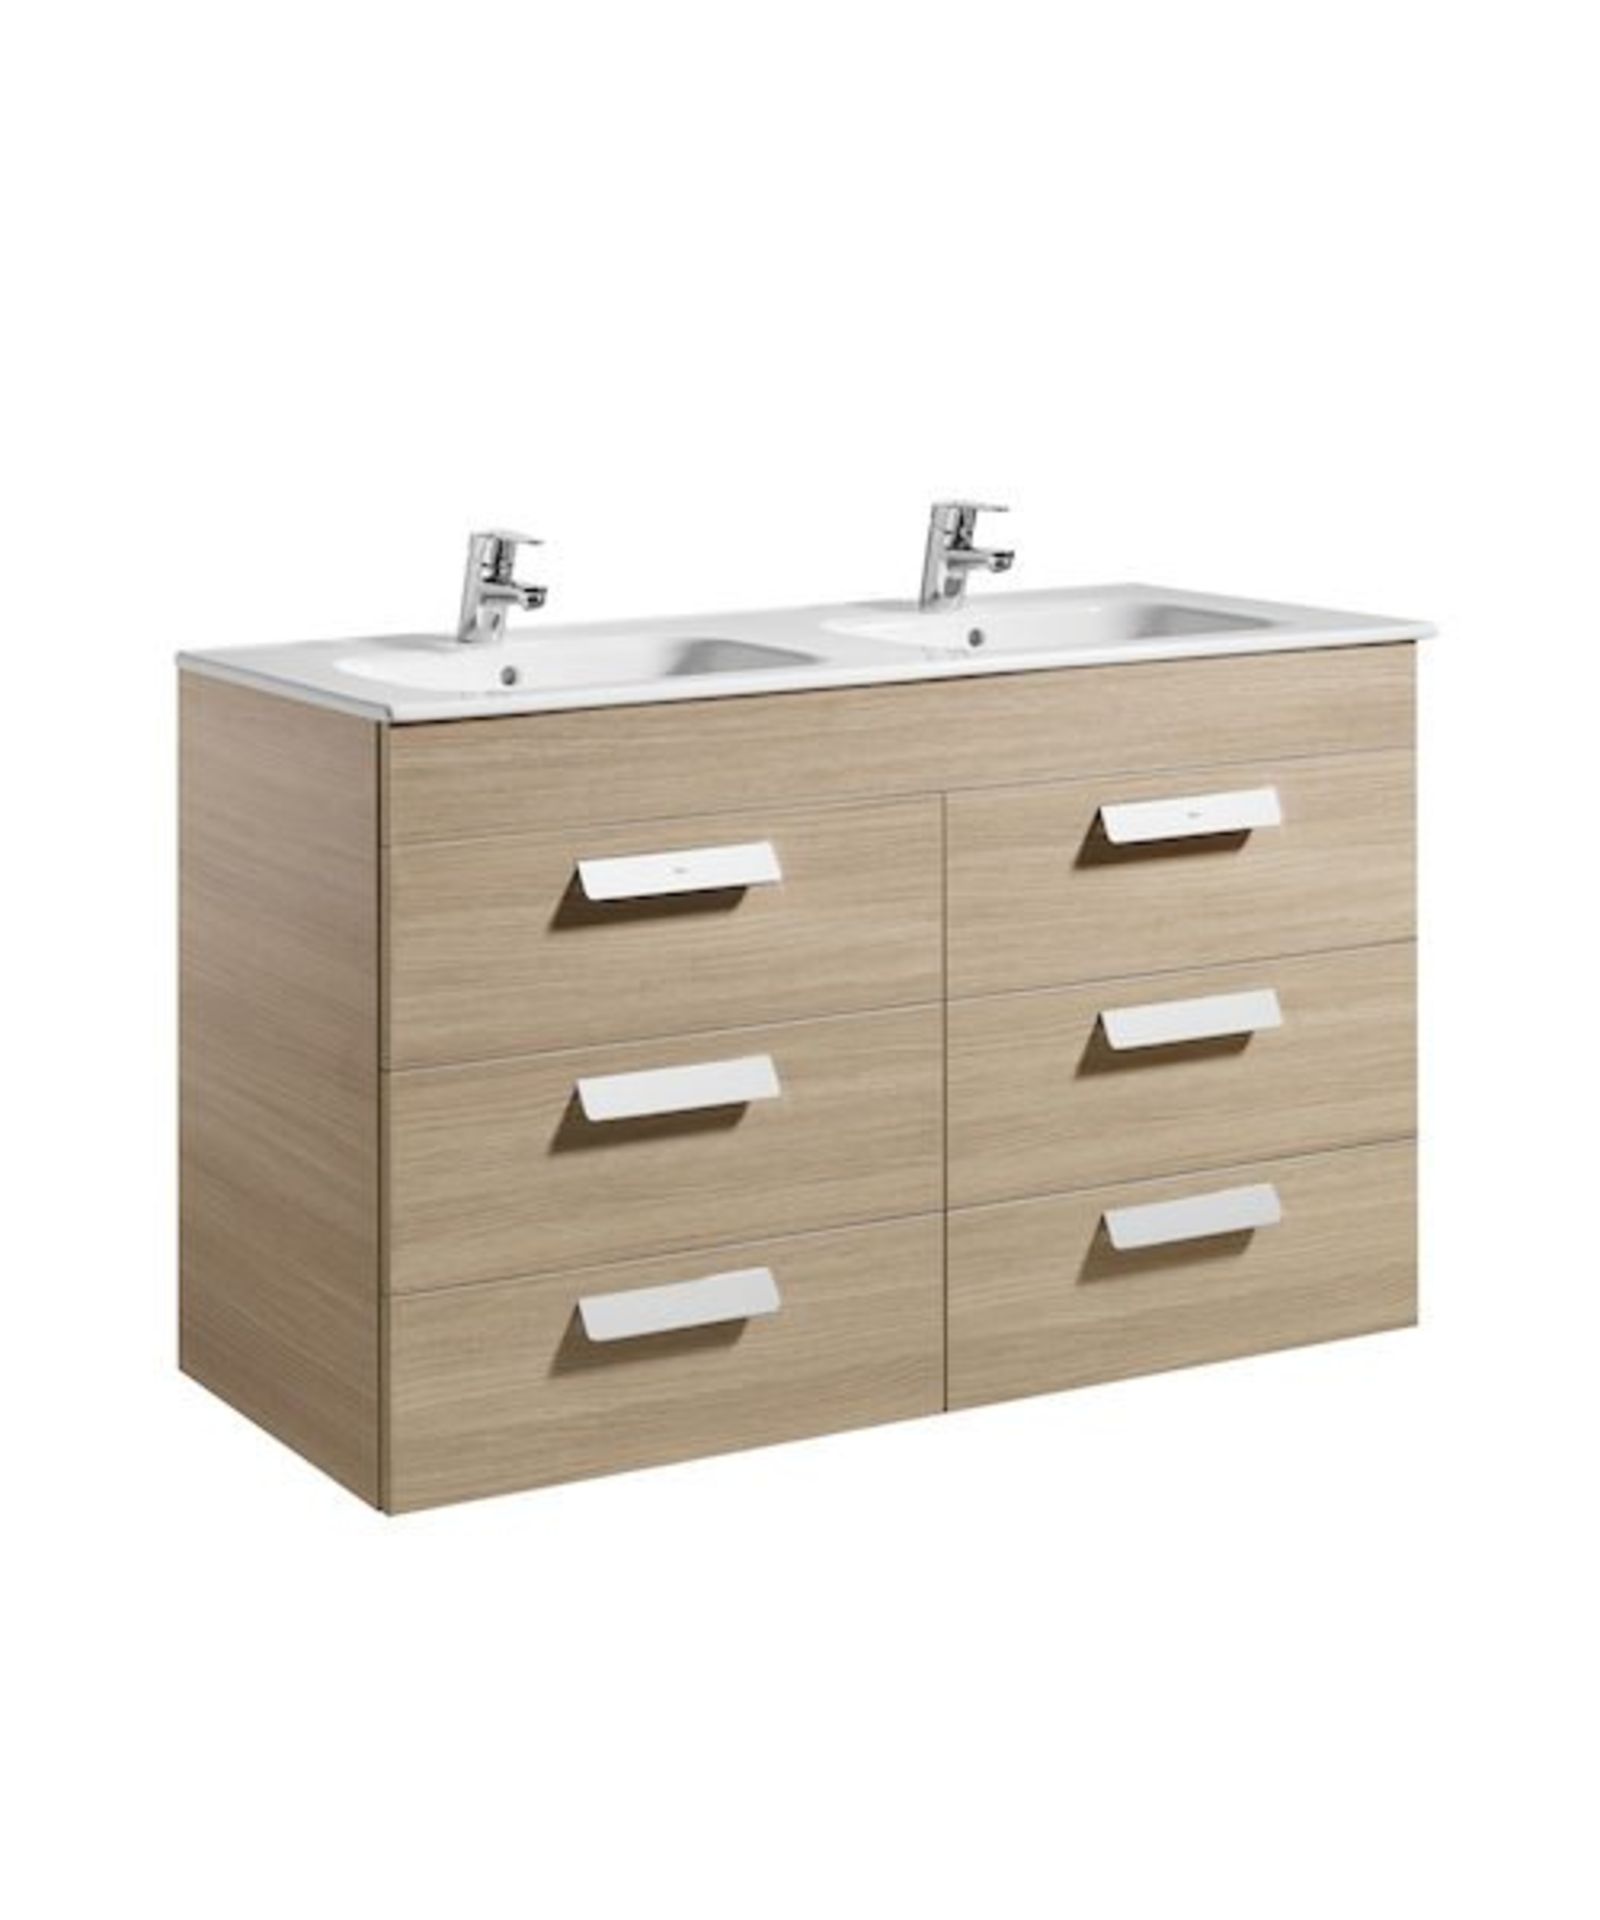 Roca base furniture 3 drawers Debba 120cm, new and boxed. RRP £800.00 | Picture is for display